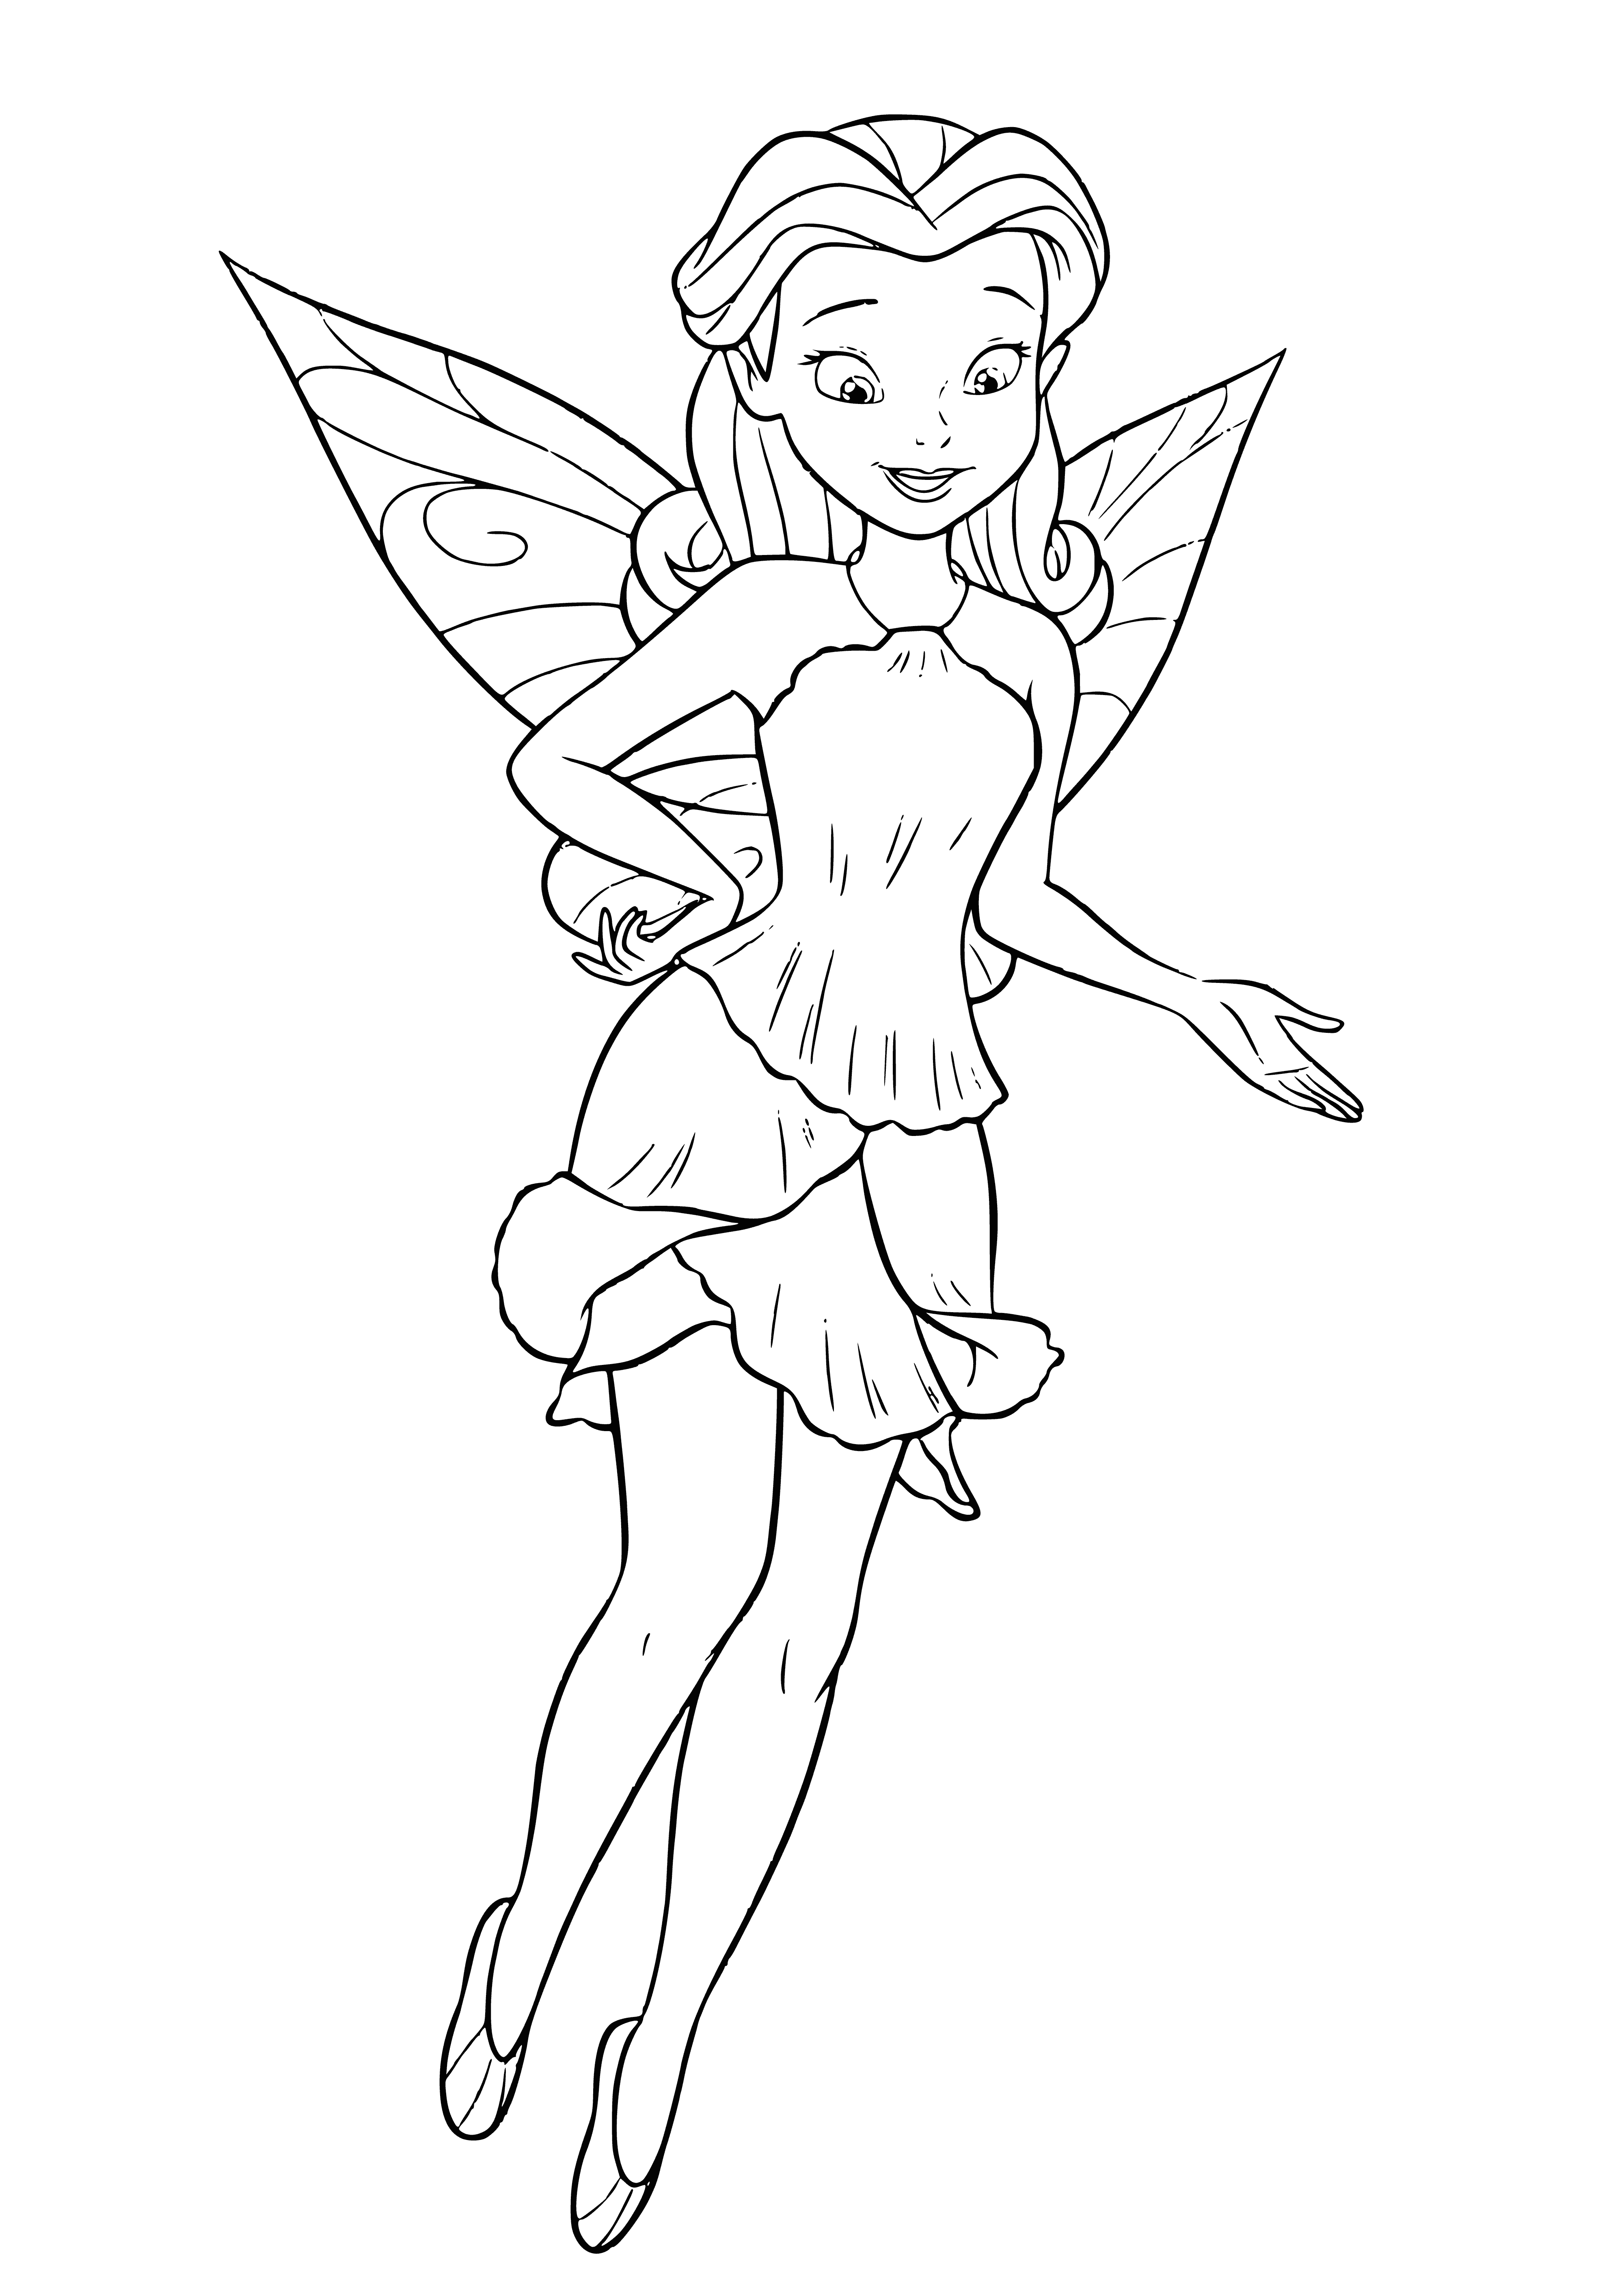 Fairy of the Rosetta Gardens coloring page